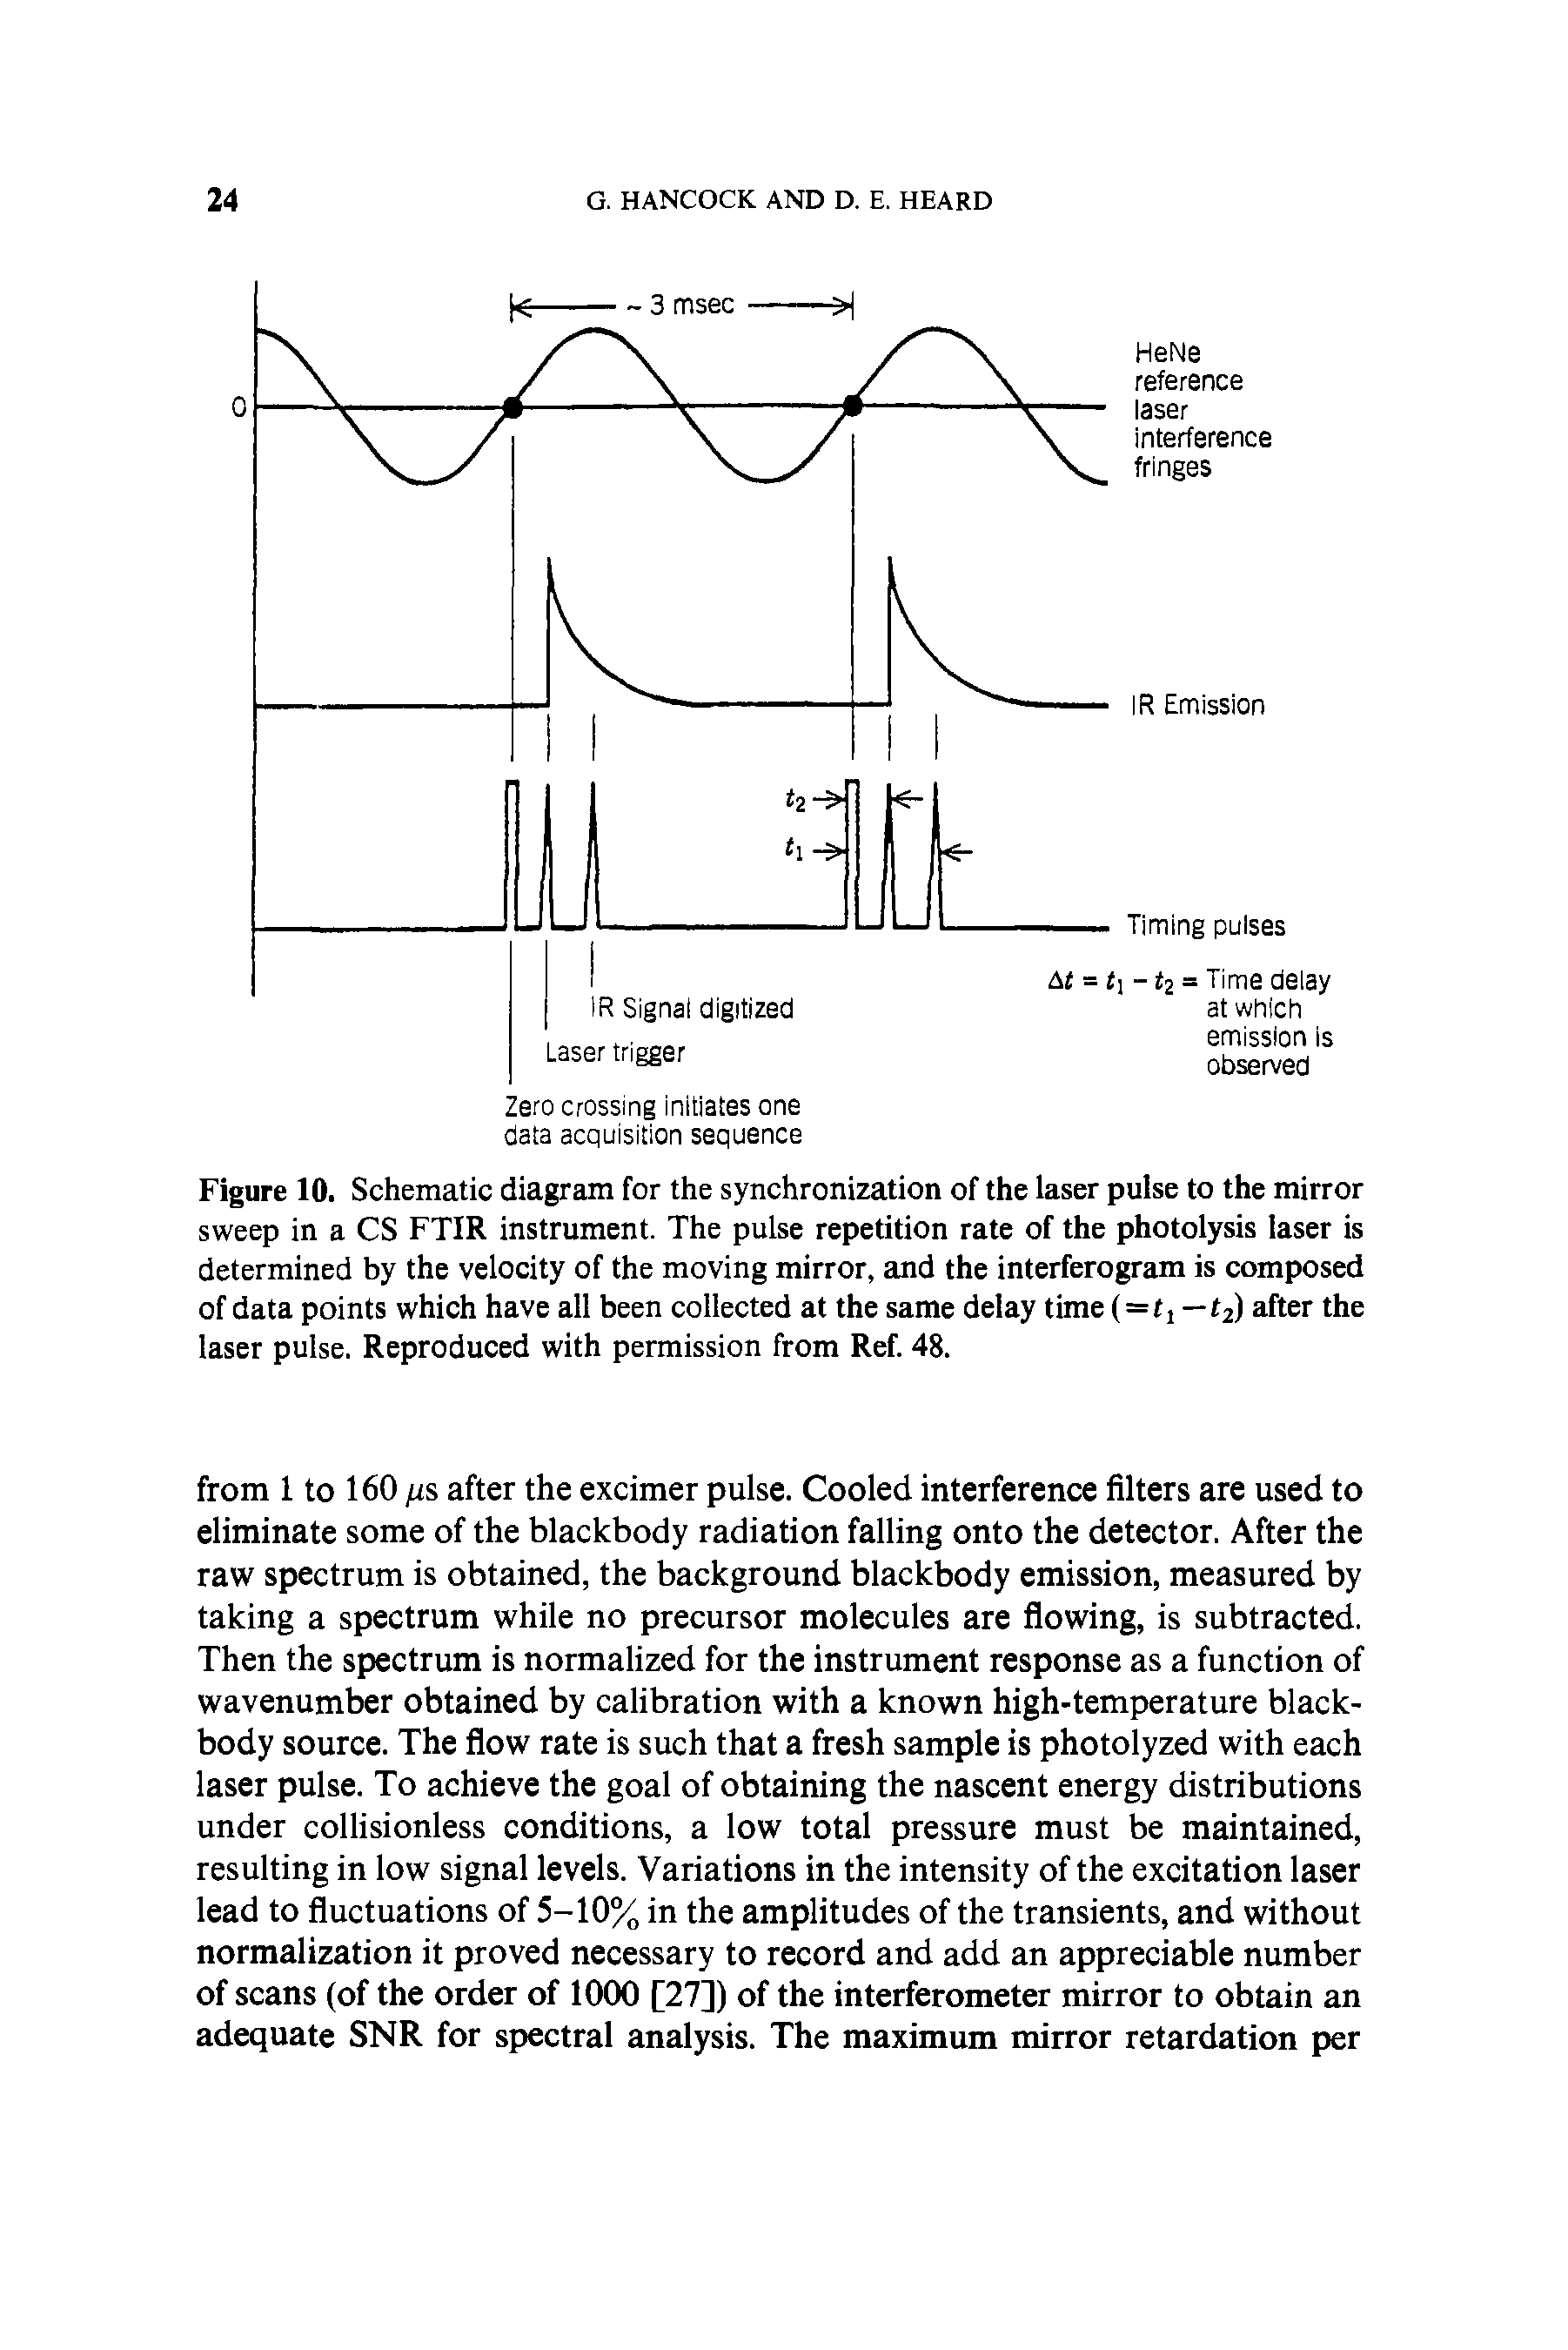 Figure 10. Schematic diagram for the synchronization of the laser pulse to the mirror sweep in a CS FTIR instrument. The pulse repetition rate of the photolysis laser is determined by the velocity of the moving mirror, and the interferogram is composed of data points which have all been collected at the same delay time (=tj —t2) after the laser pulse. Reproduced with permission from Ref. 48.